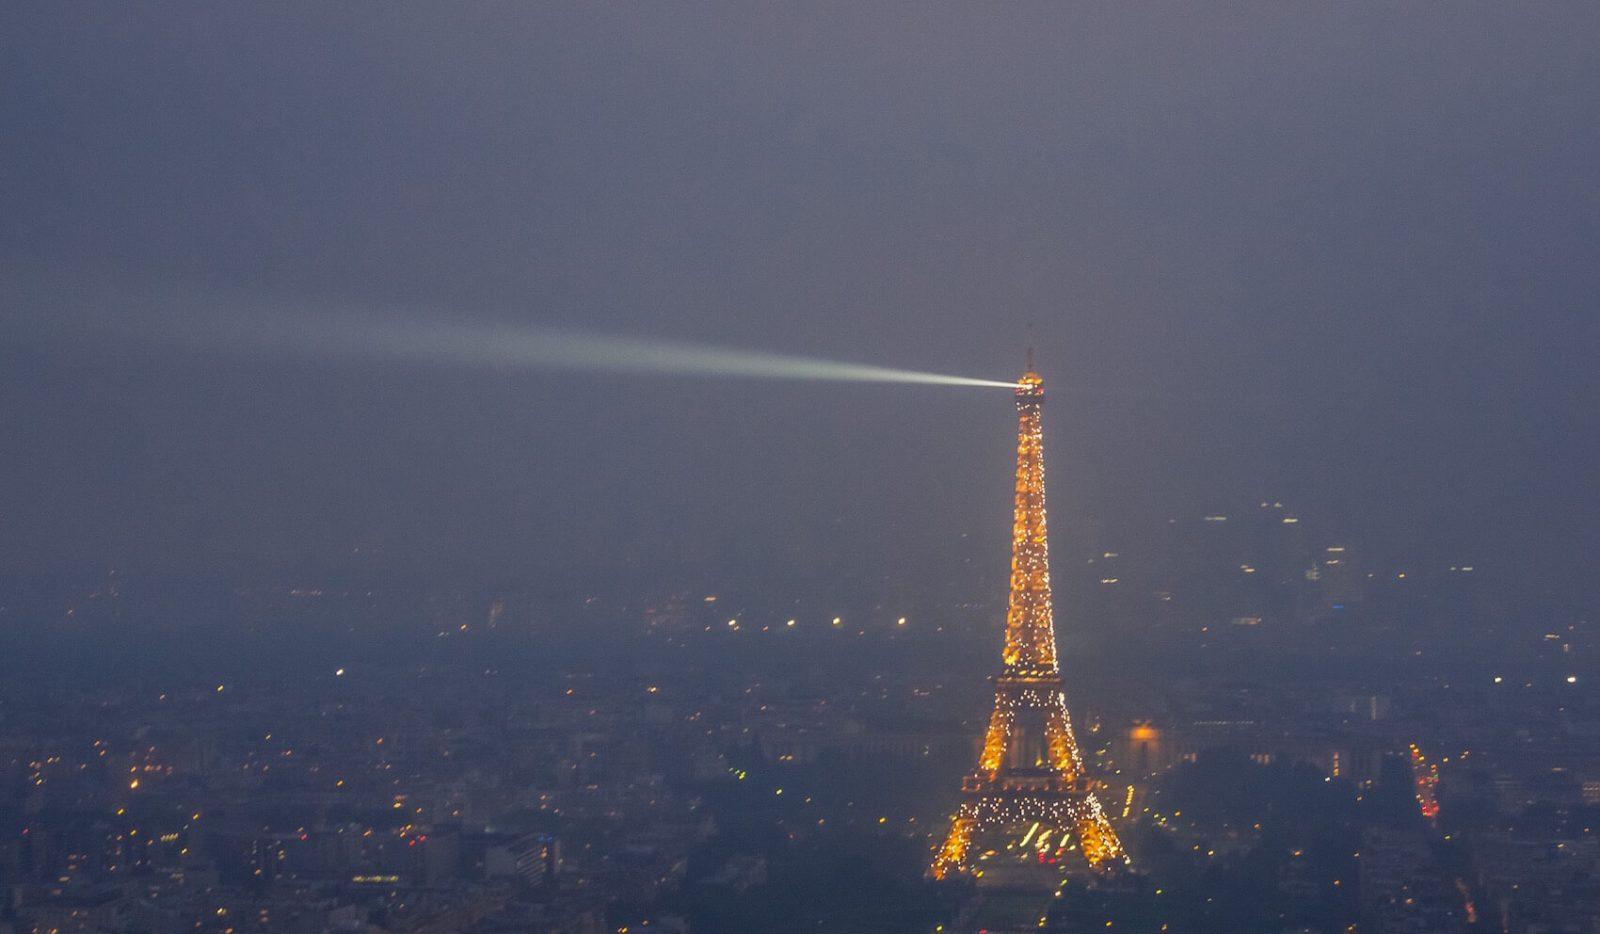 Paris experiences - see the Eiffel Tower from Montparnasse Tower